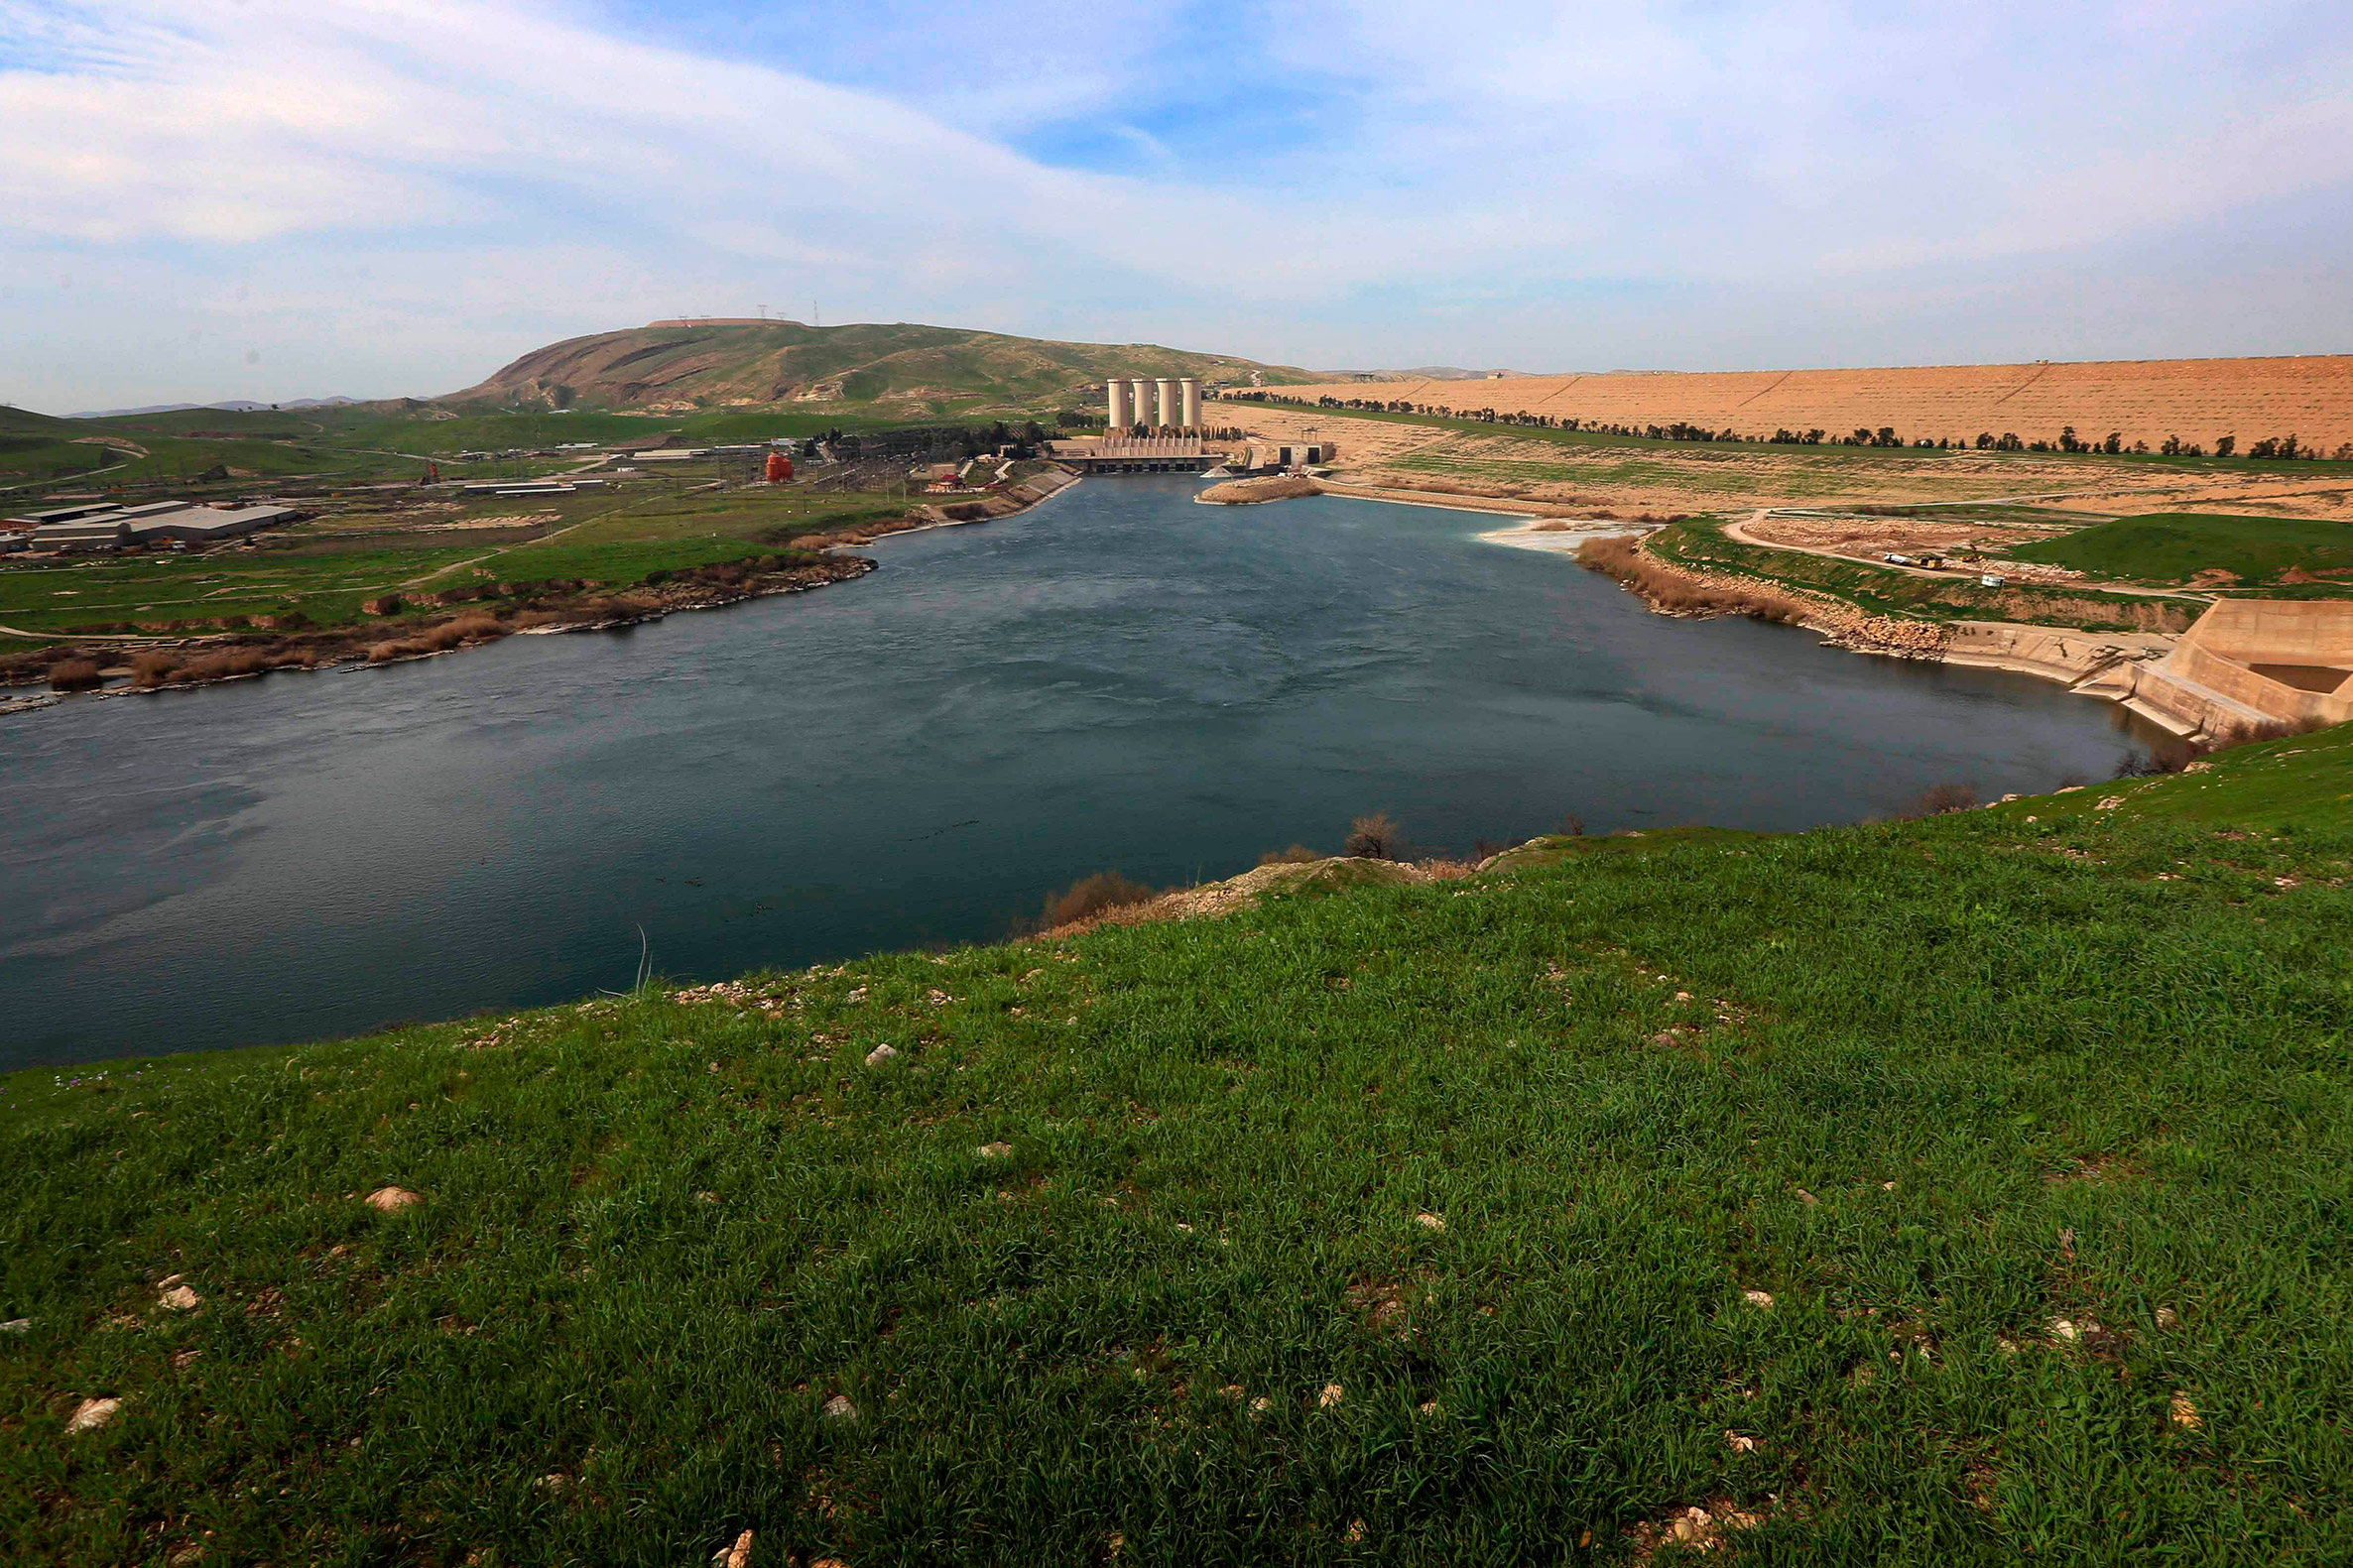 A sweeping view of the Mosul Dam on the Tigris River, about 50km north of Mosul, Iraq, March 3, 2016.